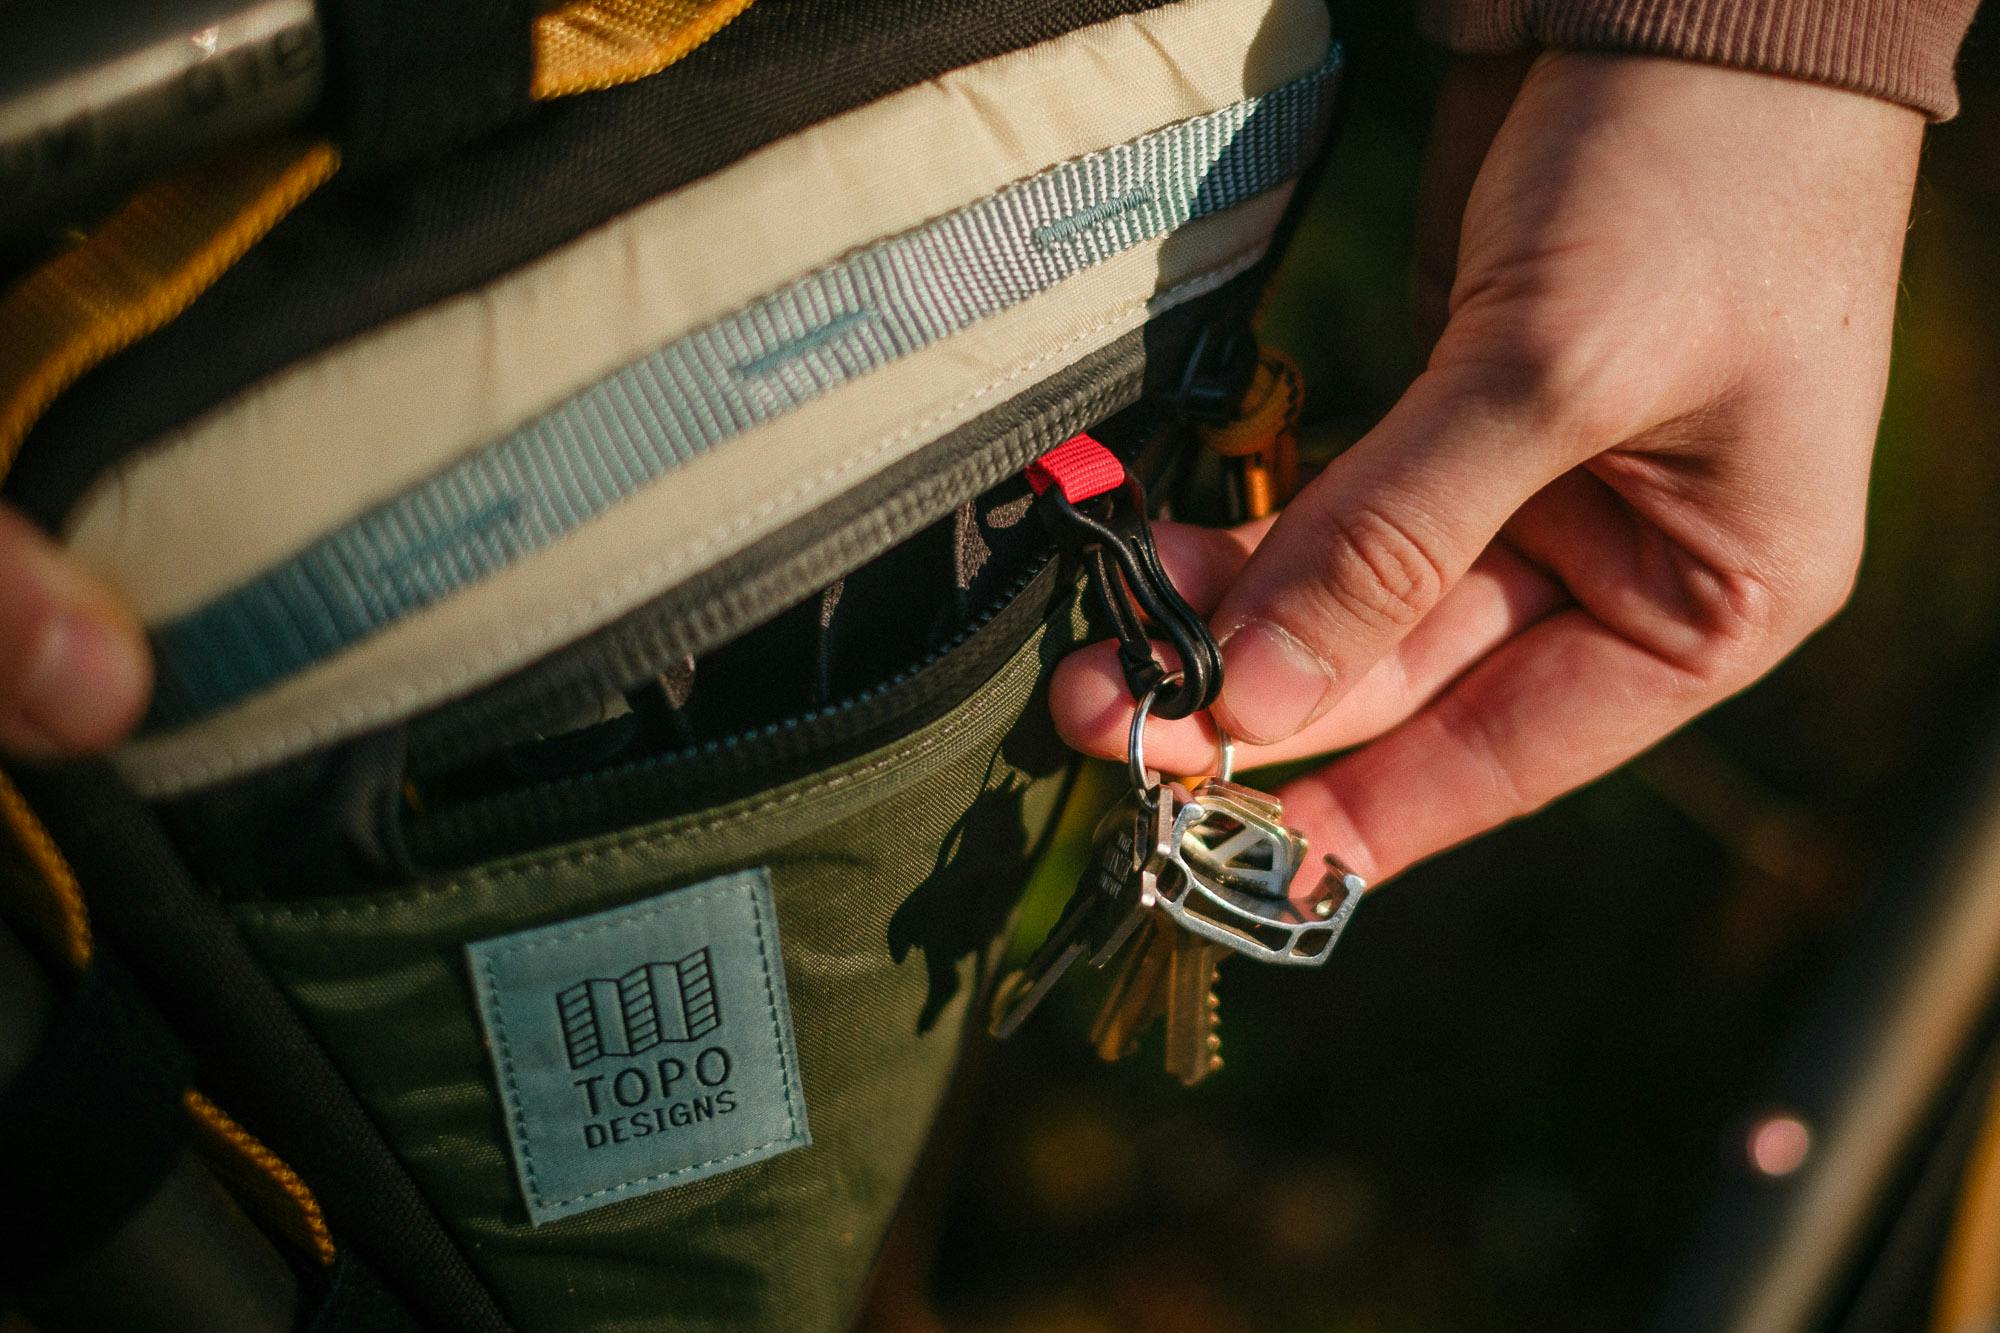 The Topo Designs frame pack with a key holder.